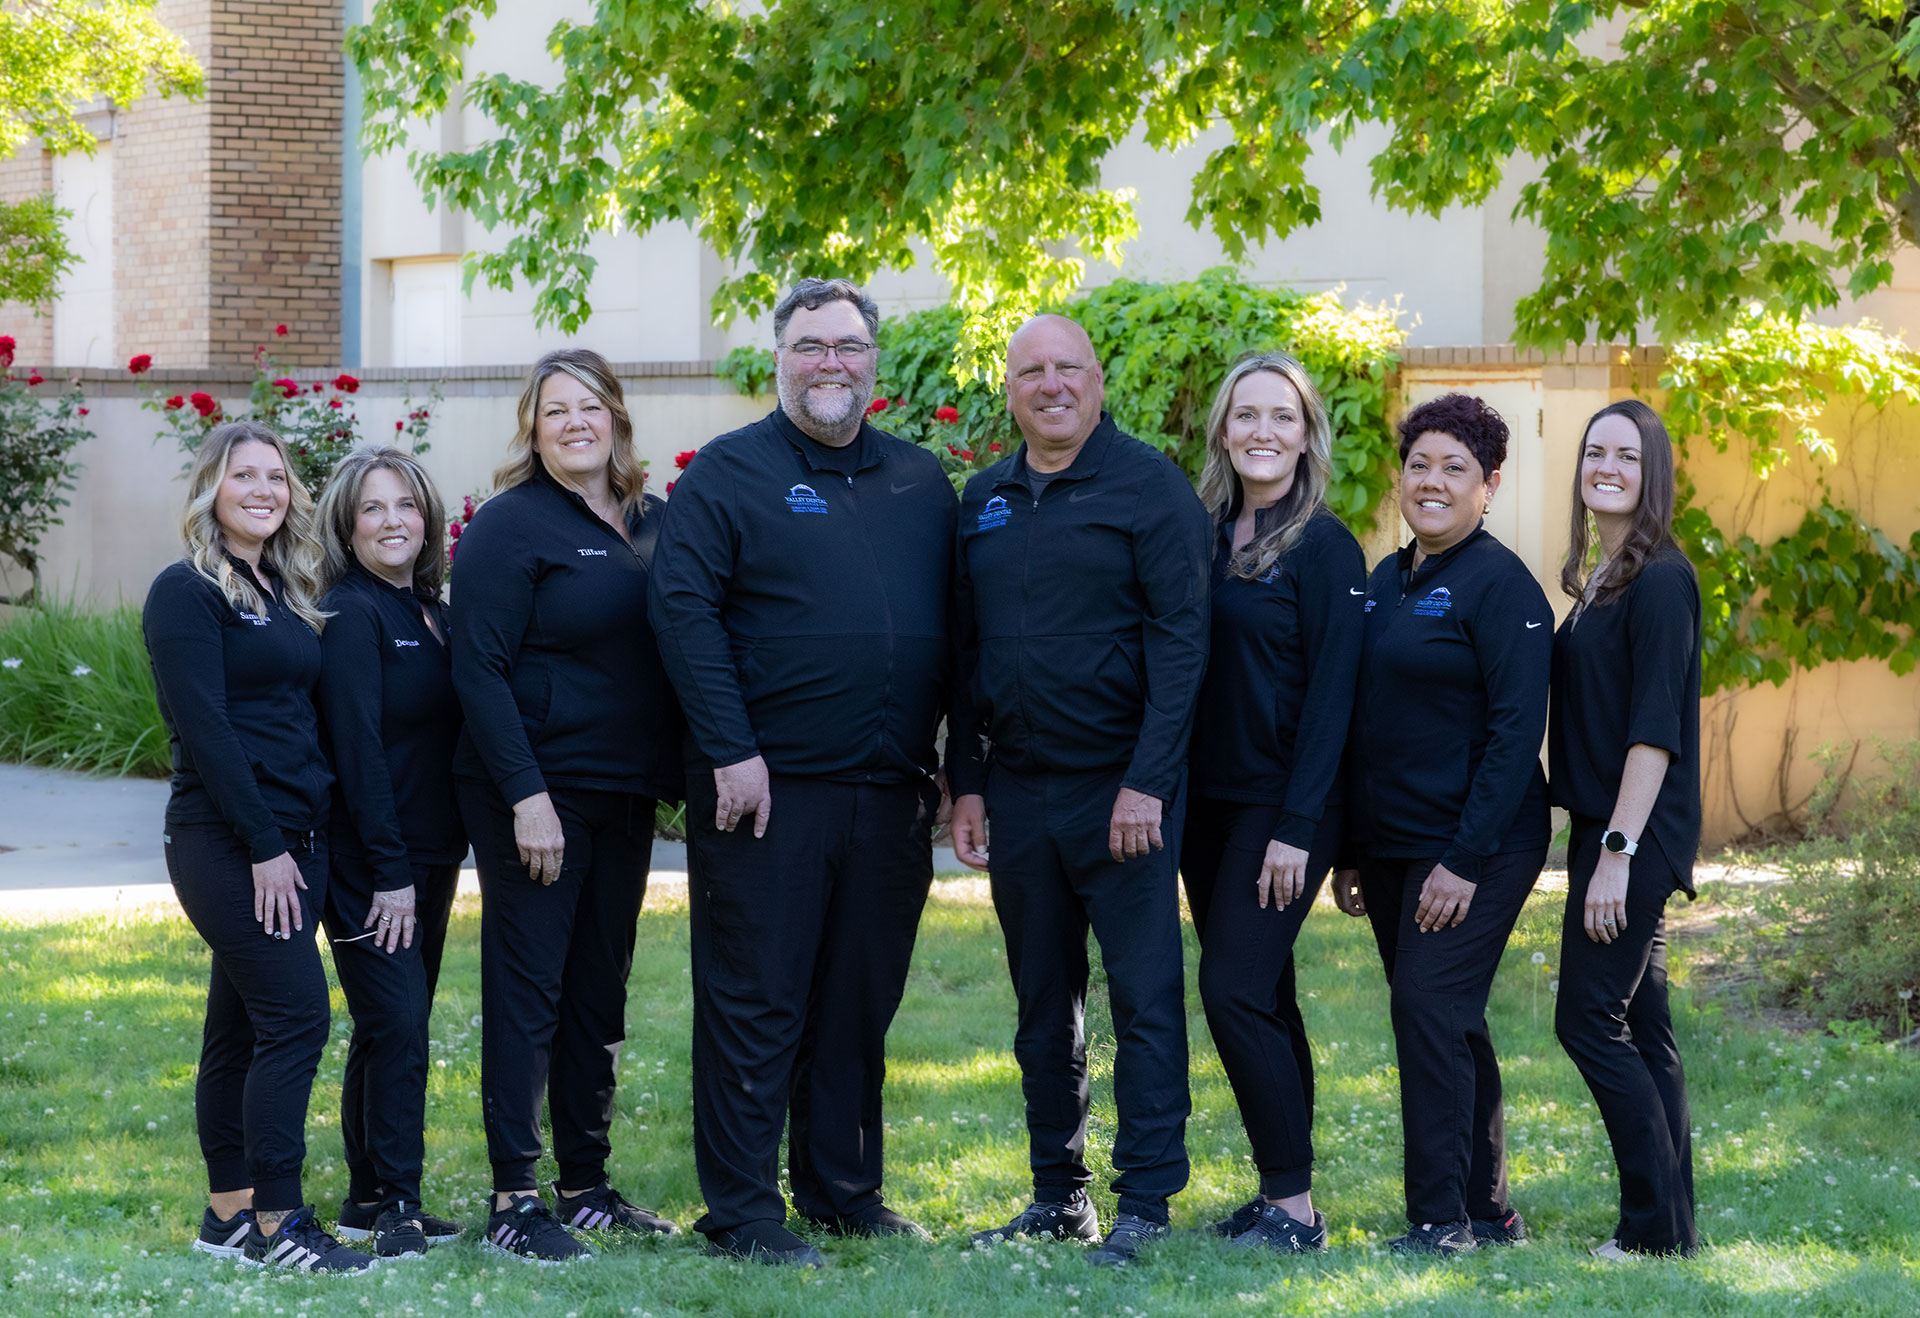 The image features a group of seven individuals, likely a team or organization, posing for a photograph outdoors. They are dressed in black shirts with visible logos and white pants, suggesting they may be part of an official uniformed group or sports team.